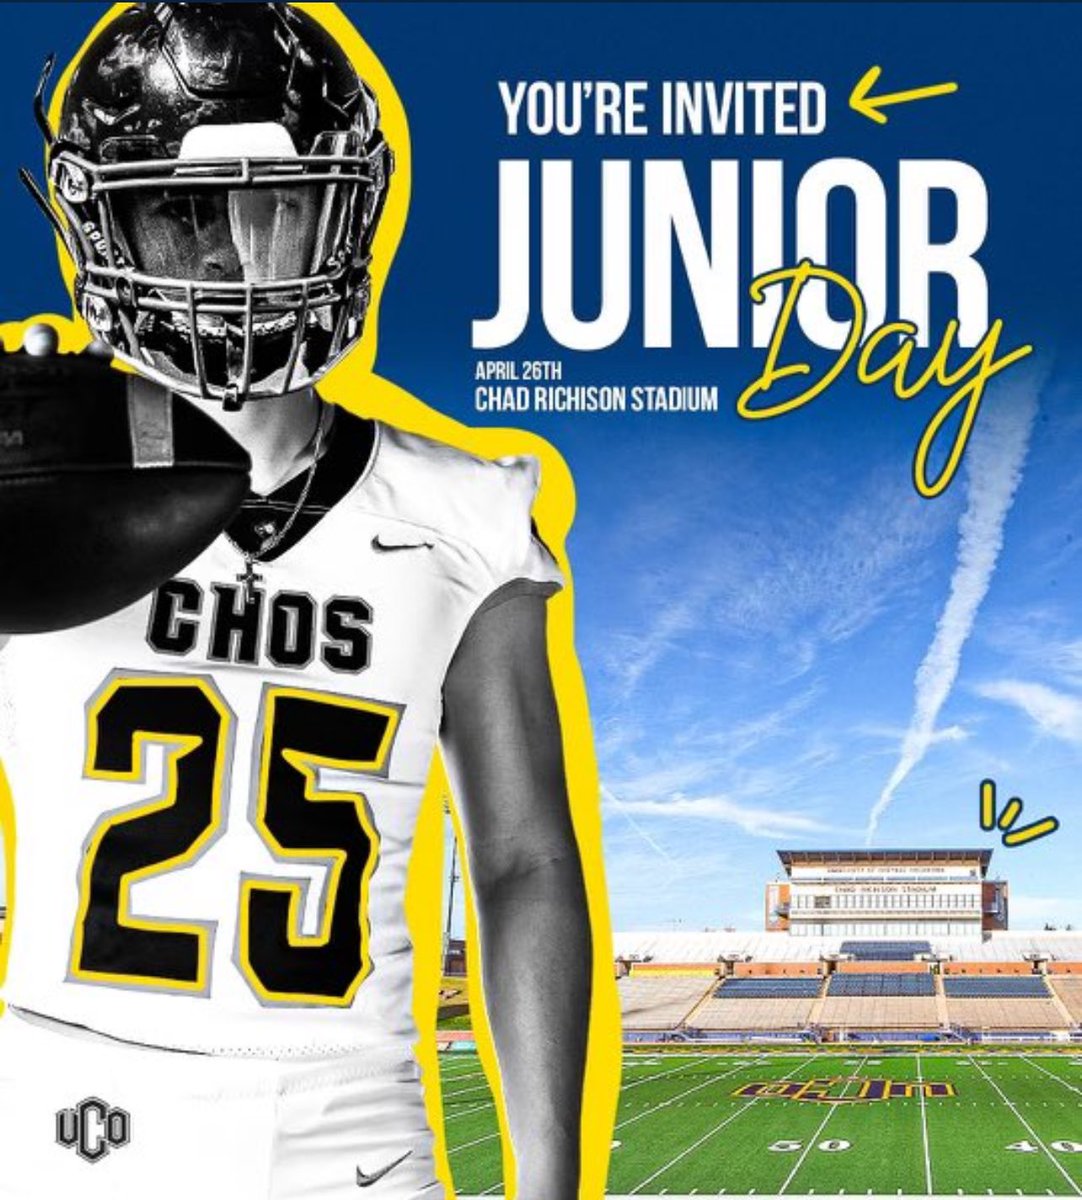 Thank you @_CoachDonald for the Jr Day invite! @ucobronchofb @BvilleFB @CoachJGrant